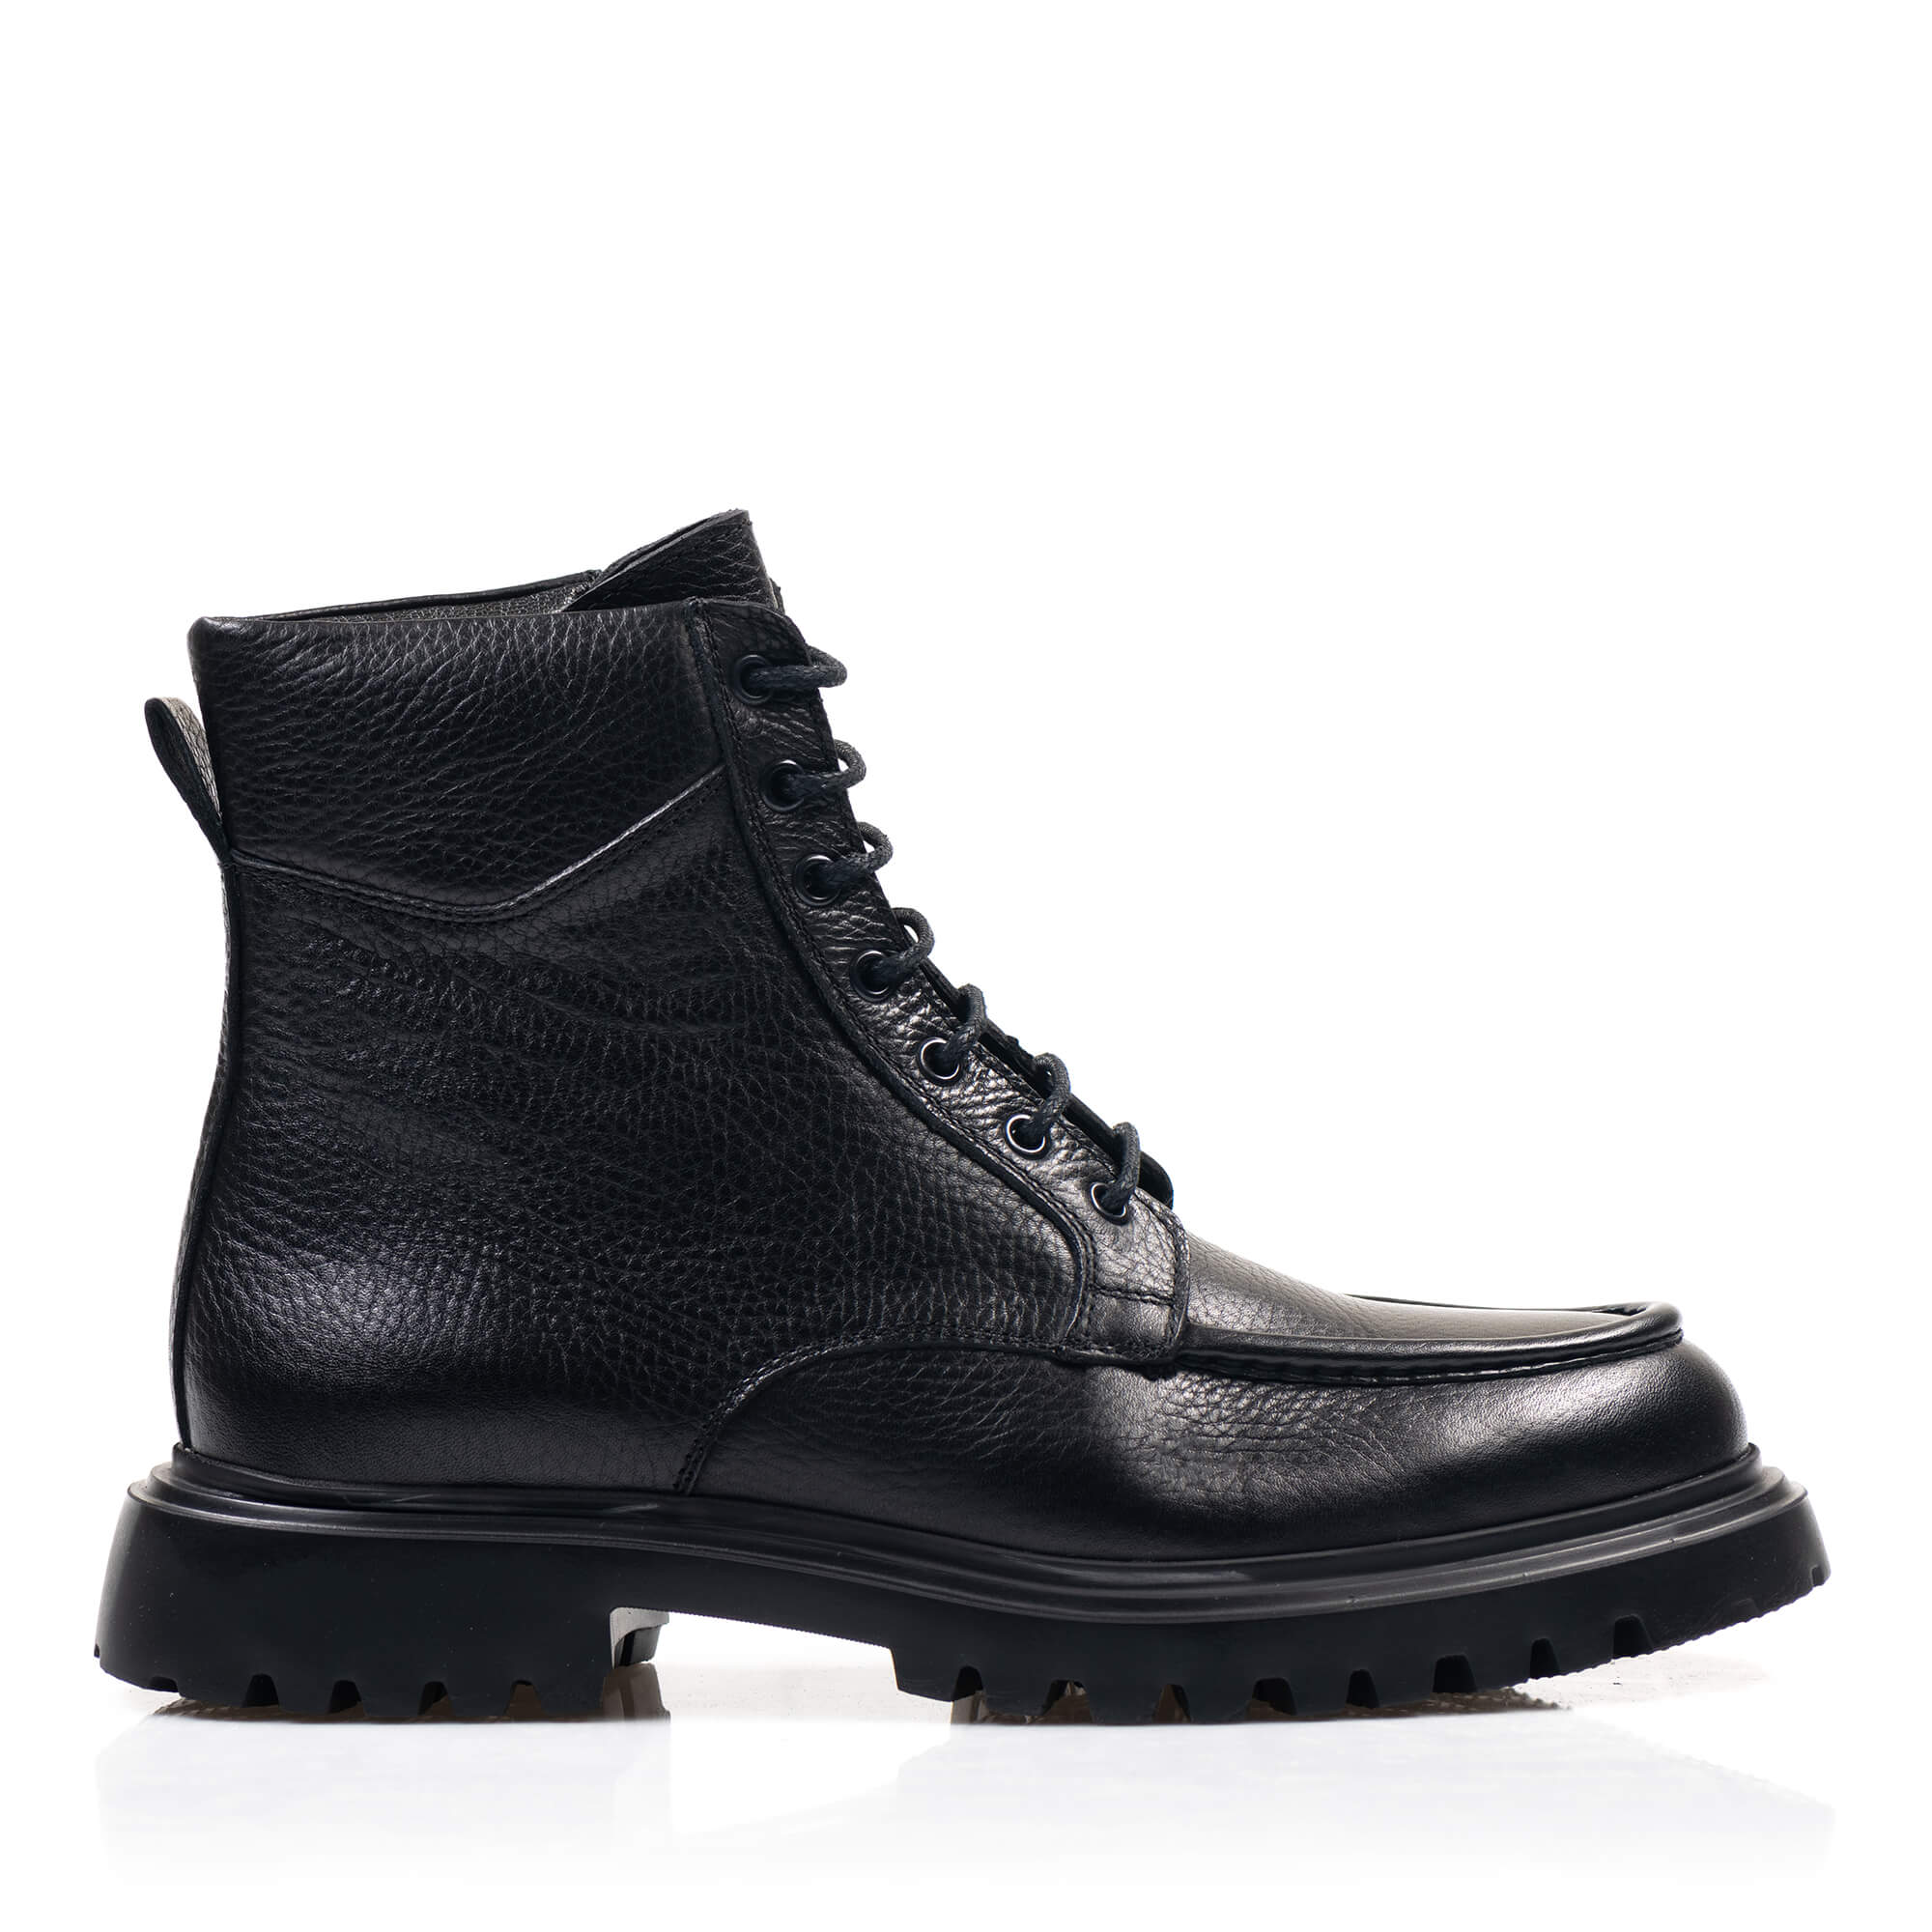 LACE-UP BOOTS LII